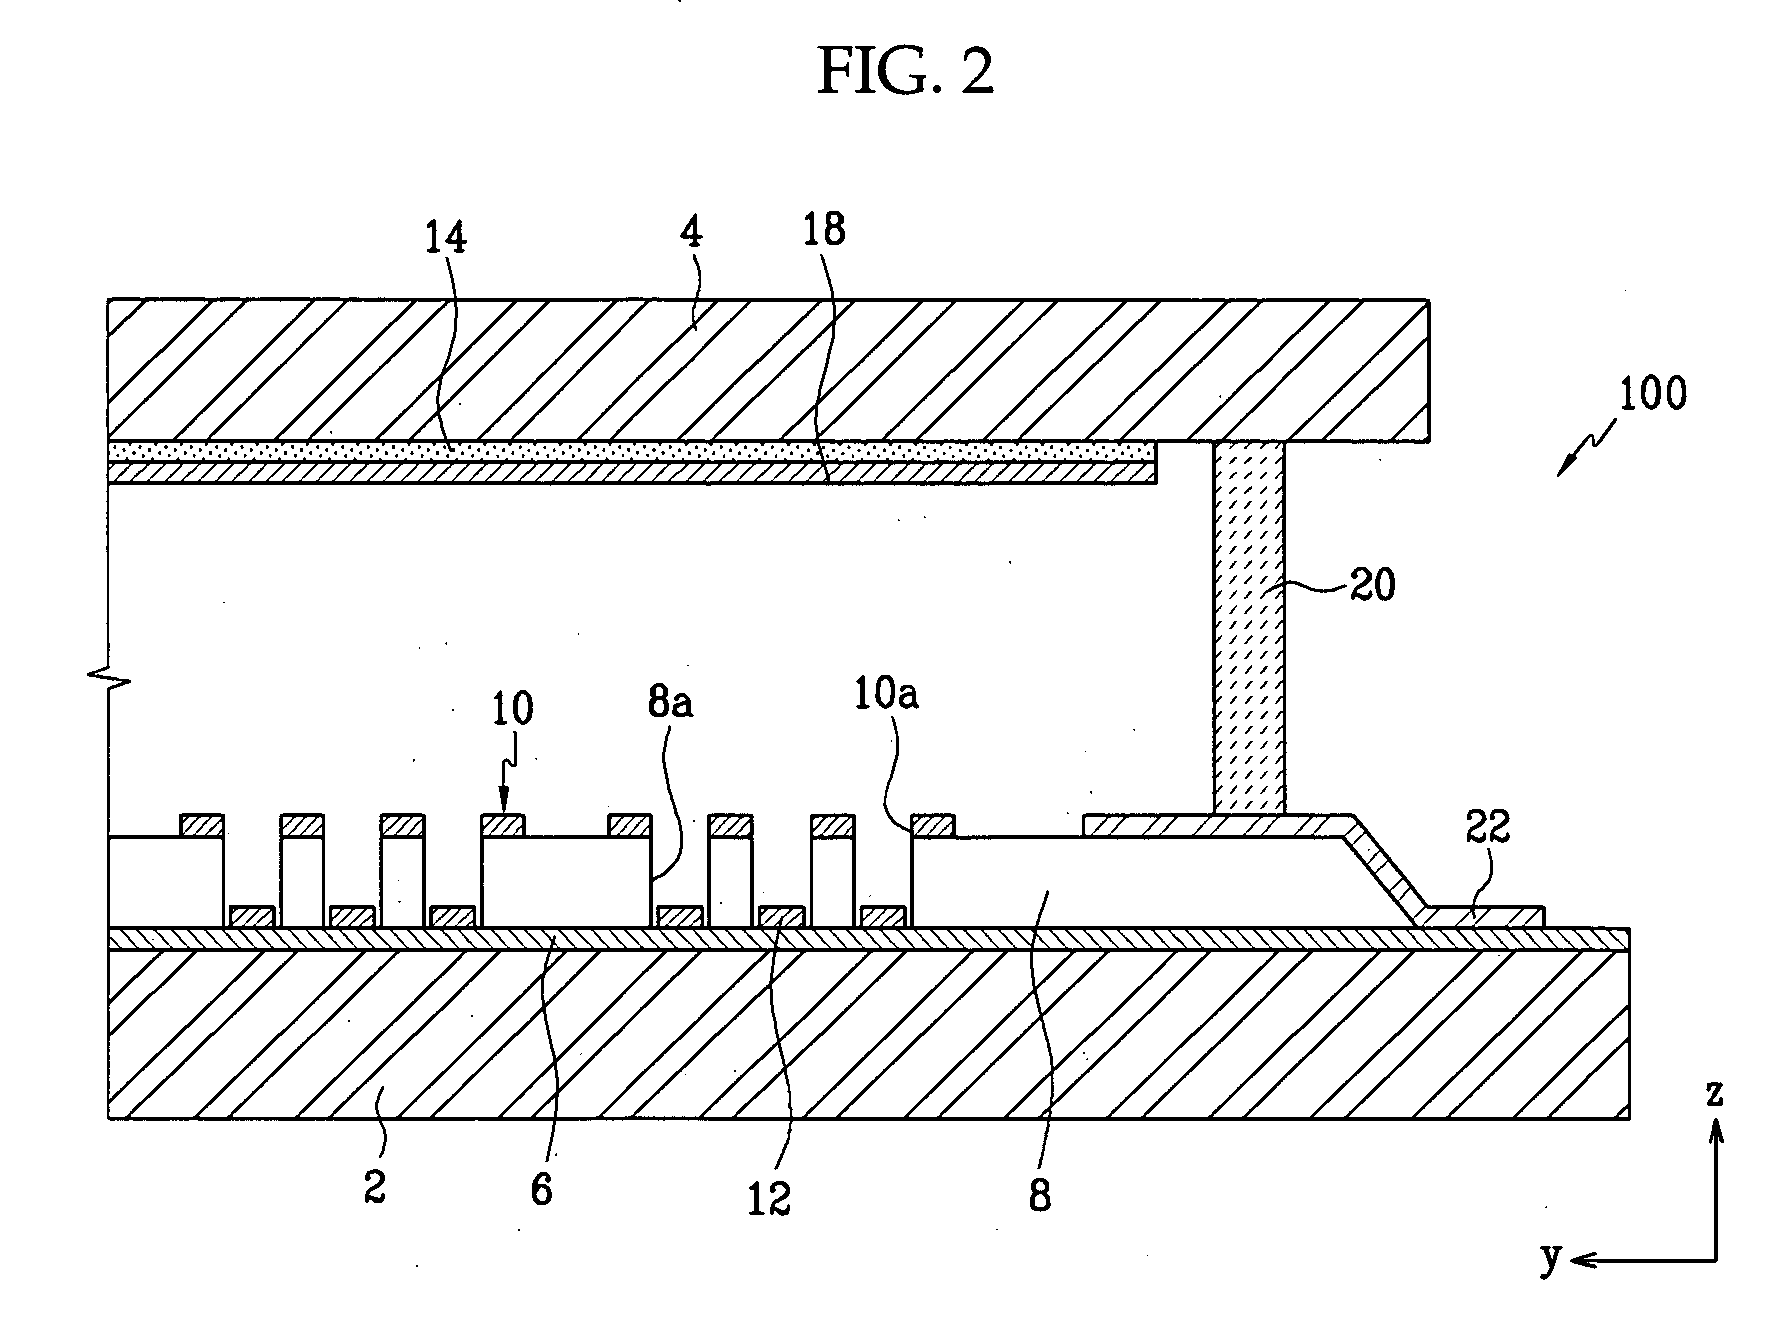 Electron emission device including conductive layers for preventing accumulation of static charge